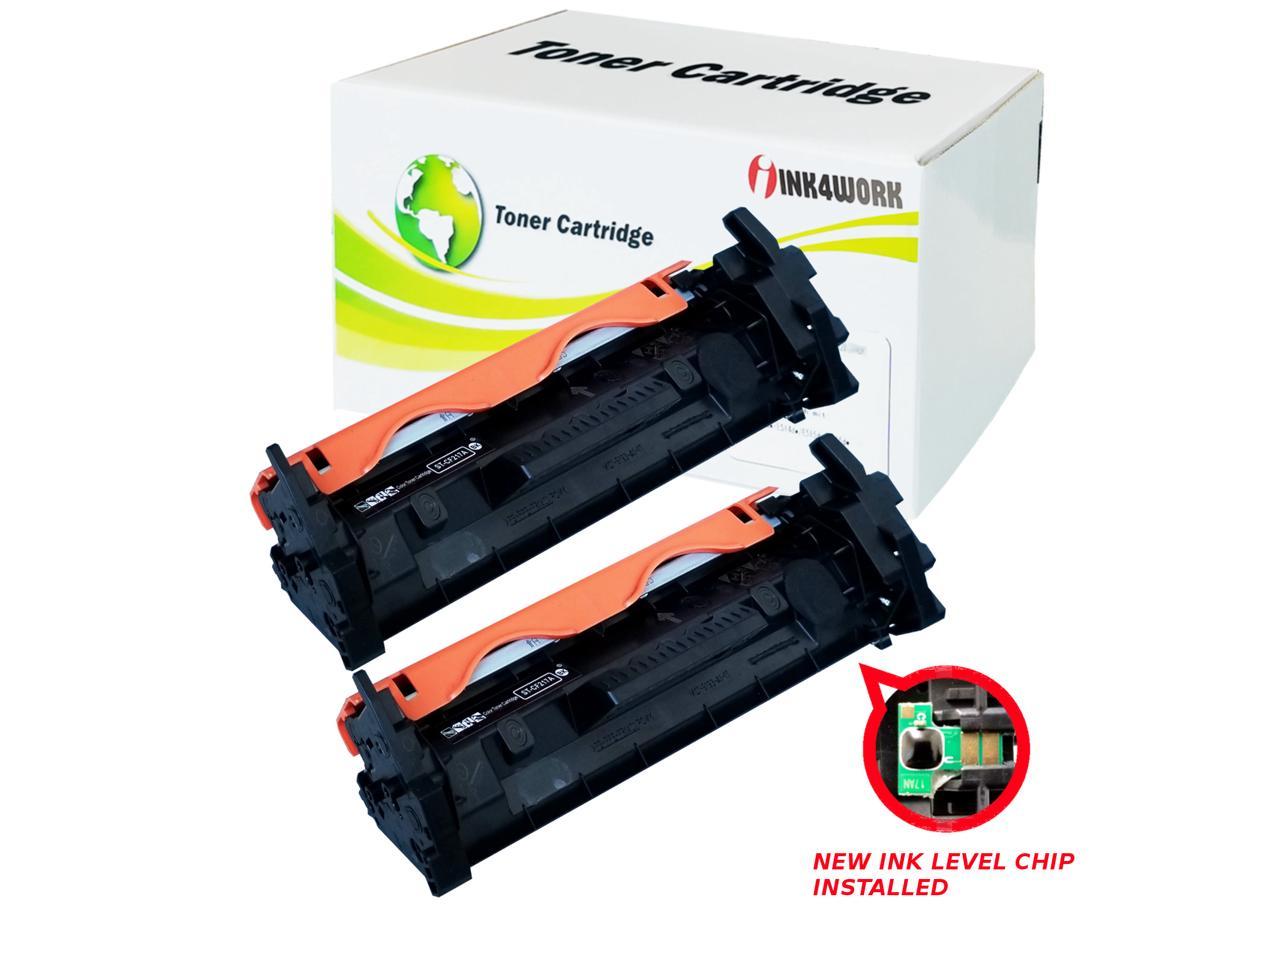 use for HP Laserjet Pro M102 M102w Color4work Compatible Toner Cartridge Replacement for HP 17A CF217A Black MFP M130 M130fn M130fw M130fn Printer 2-Pack 